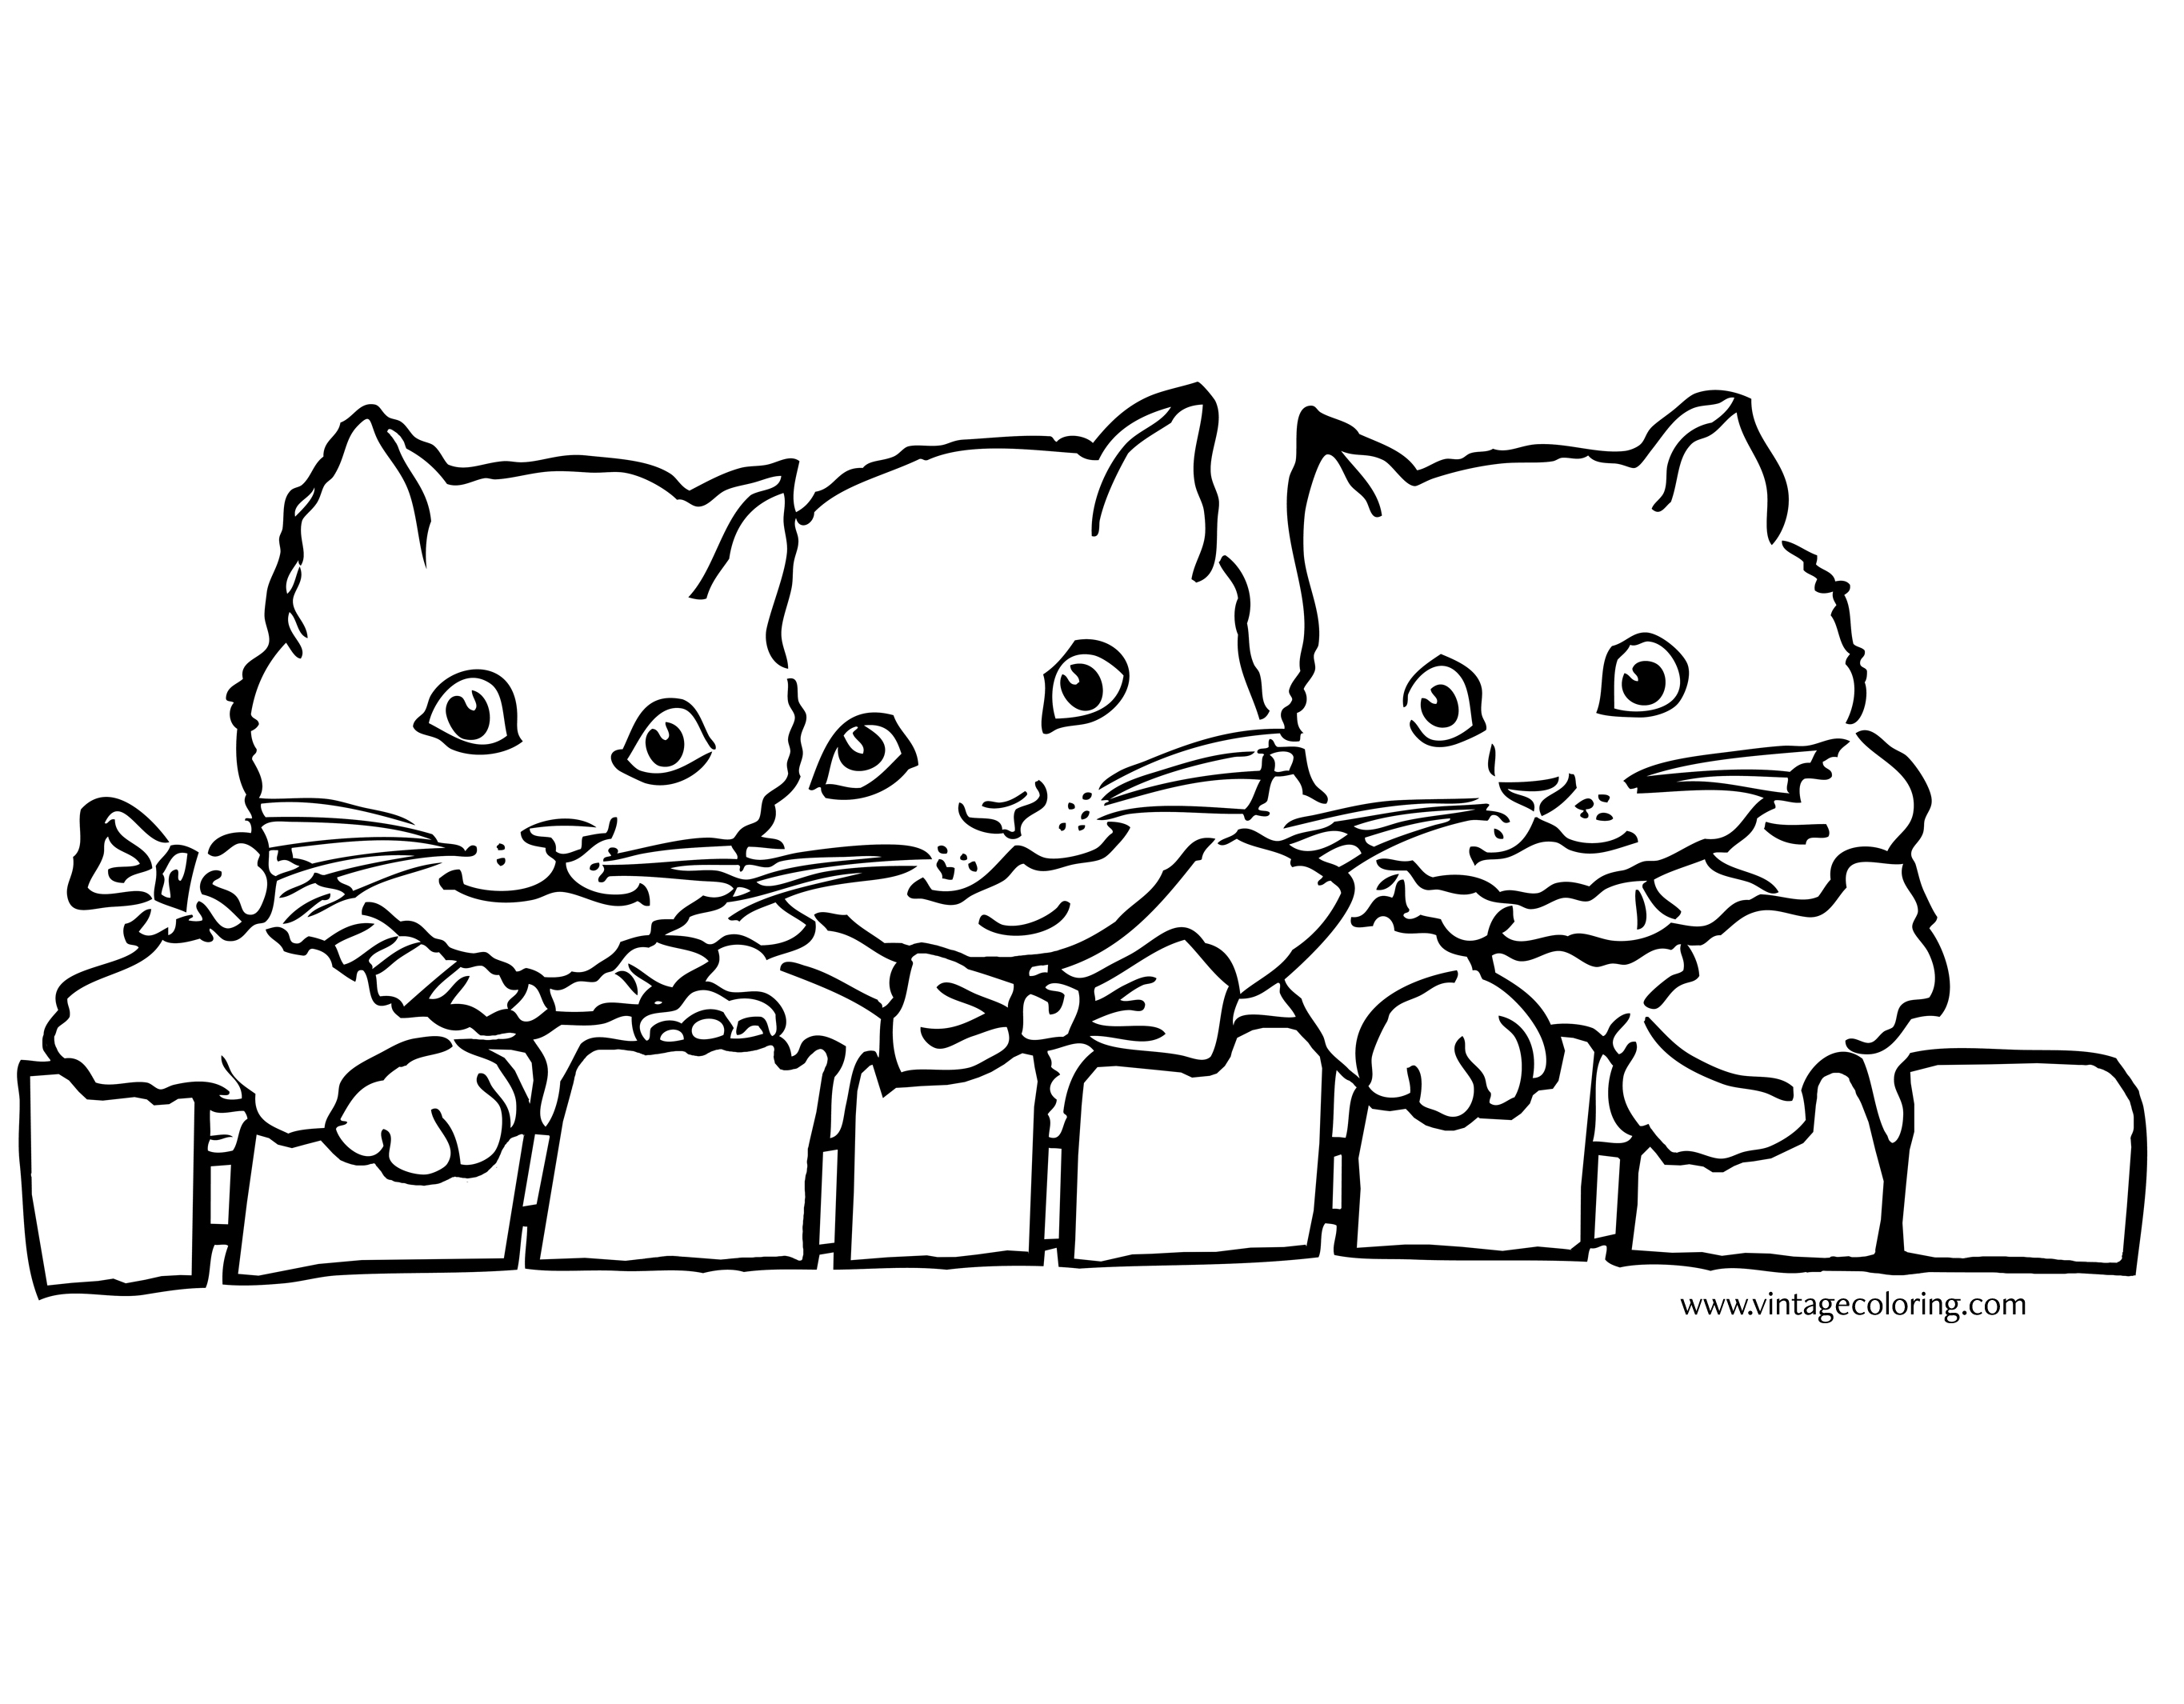 Three Kittens on a Fence - A Free Vintage Coloring Page